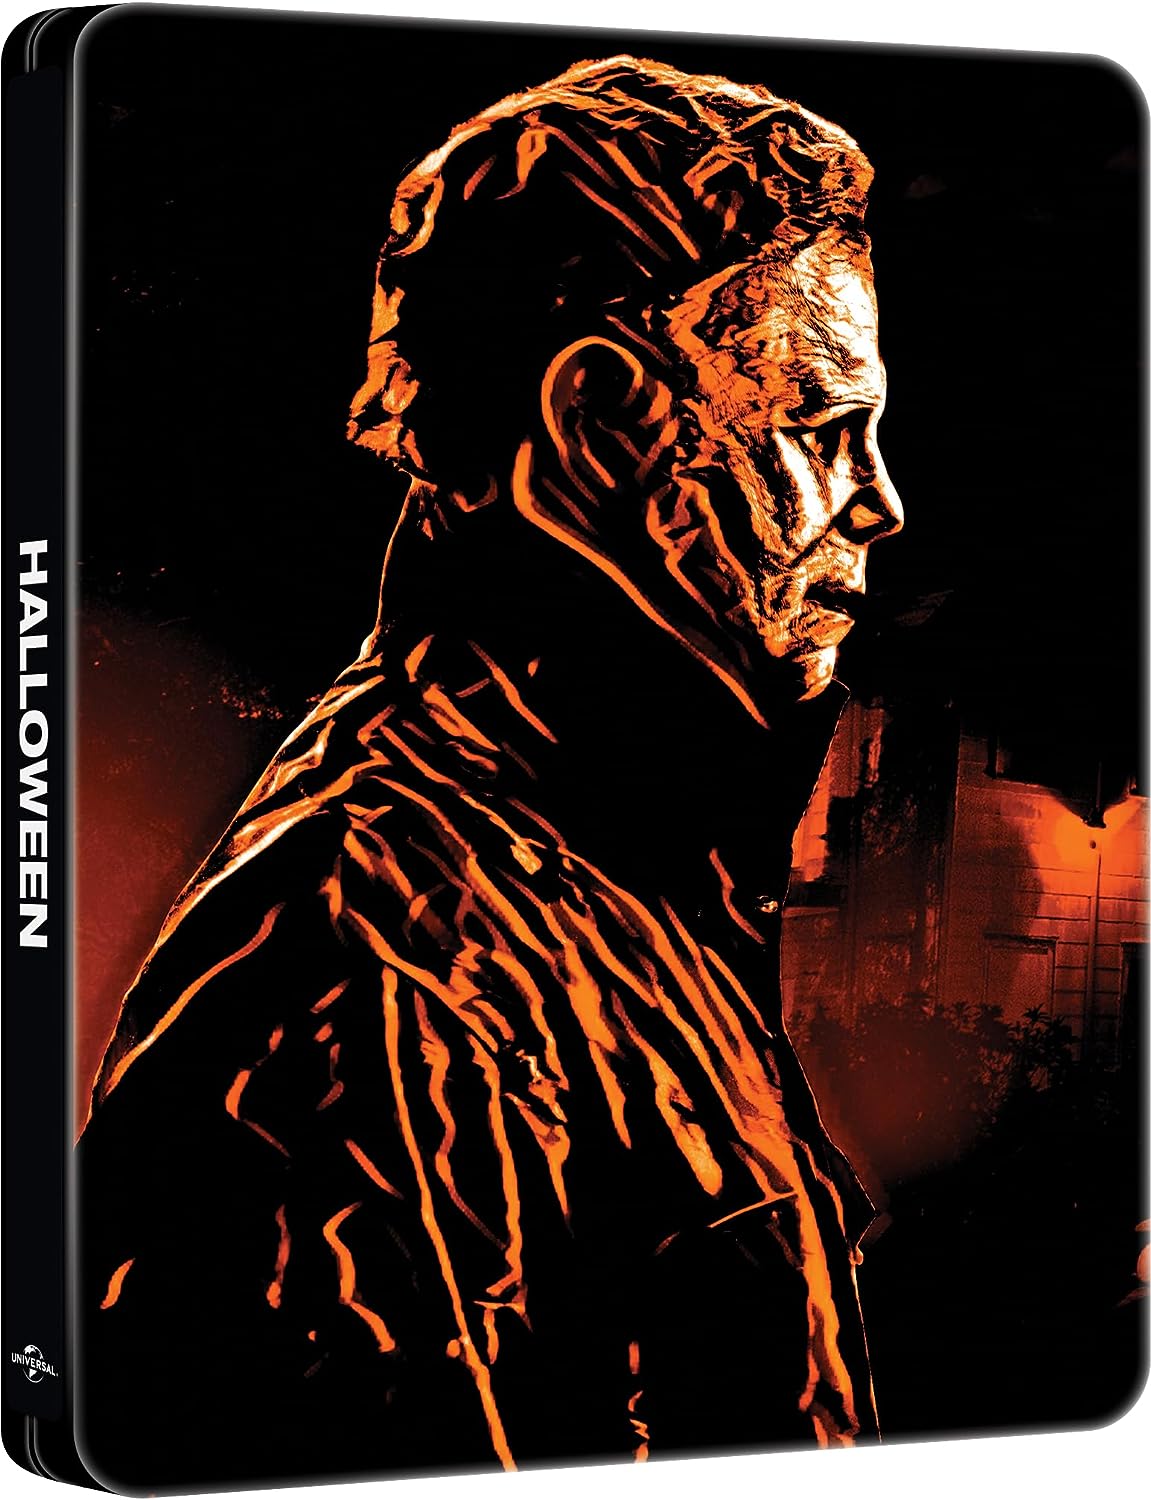 Halloween Trilogy Limited Edition Universal Pictures 4K UHD/Blu-Ray Steelbook Box Set [NEW]